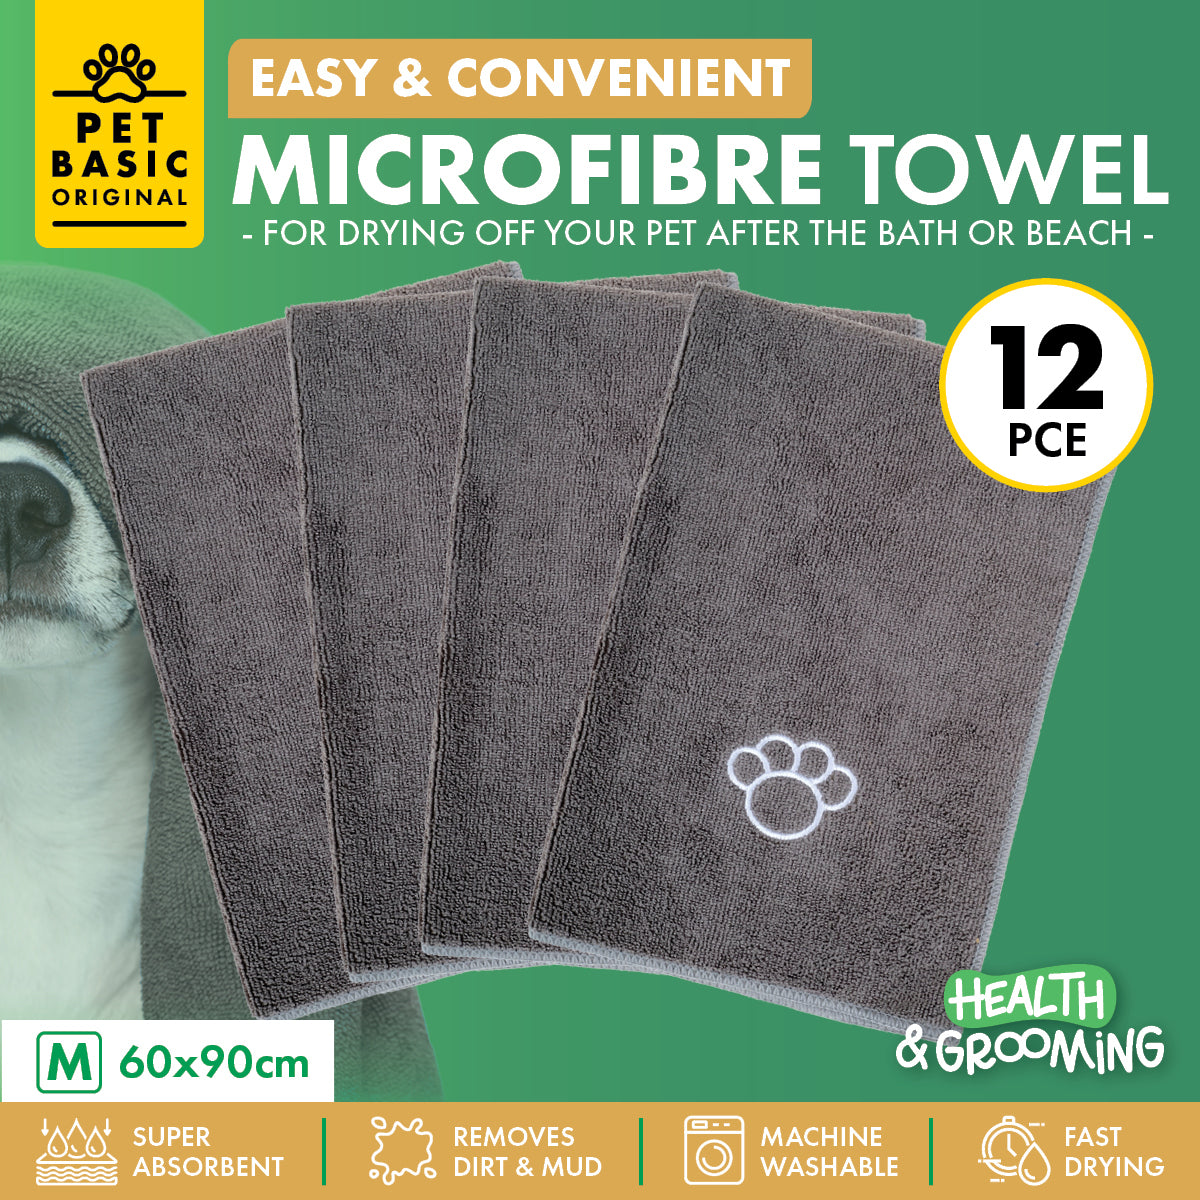 Pet Basic 12PCE Microfibre Towels Super Absorbent Fast Drying 60 x 90cm